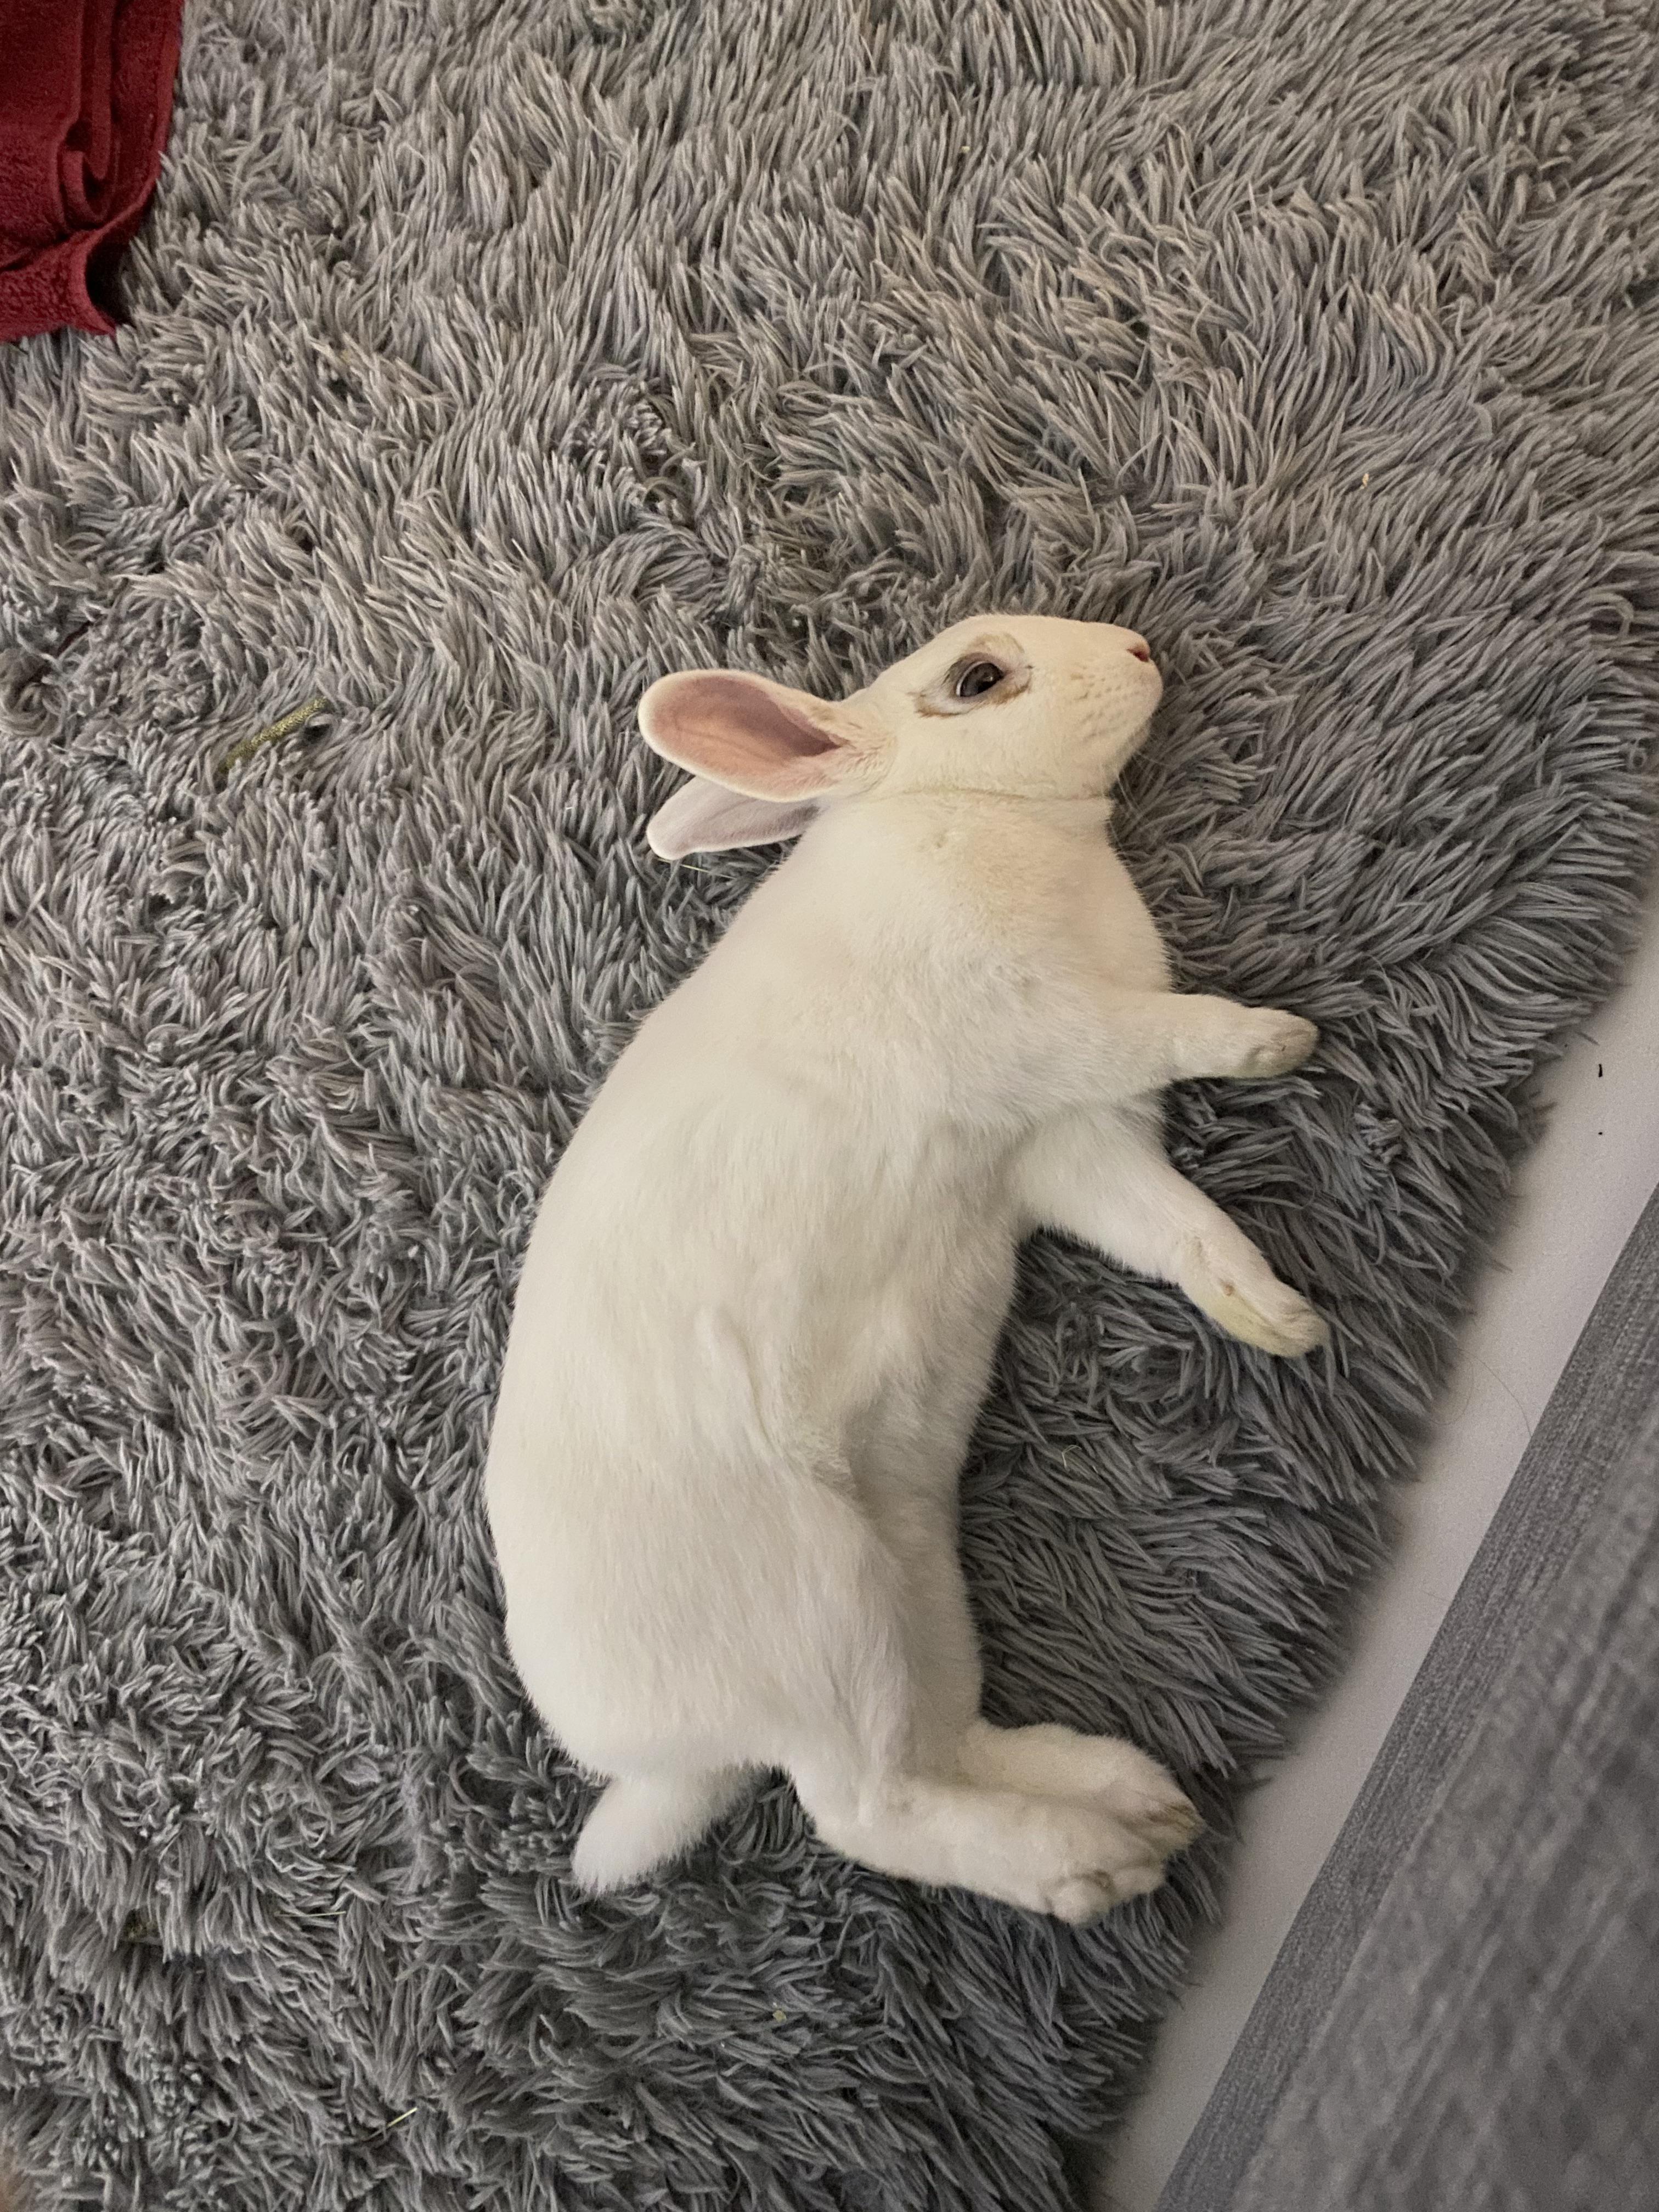 History Of The Relaxed Bunny